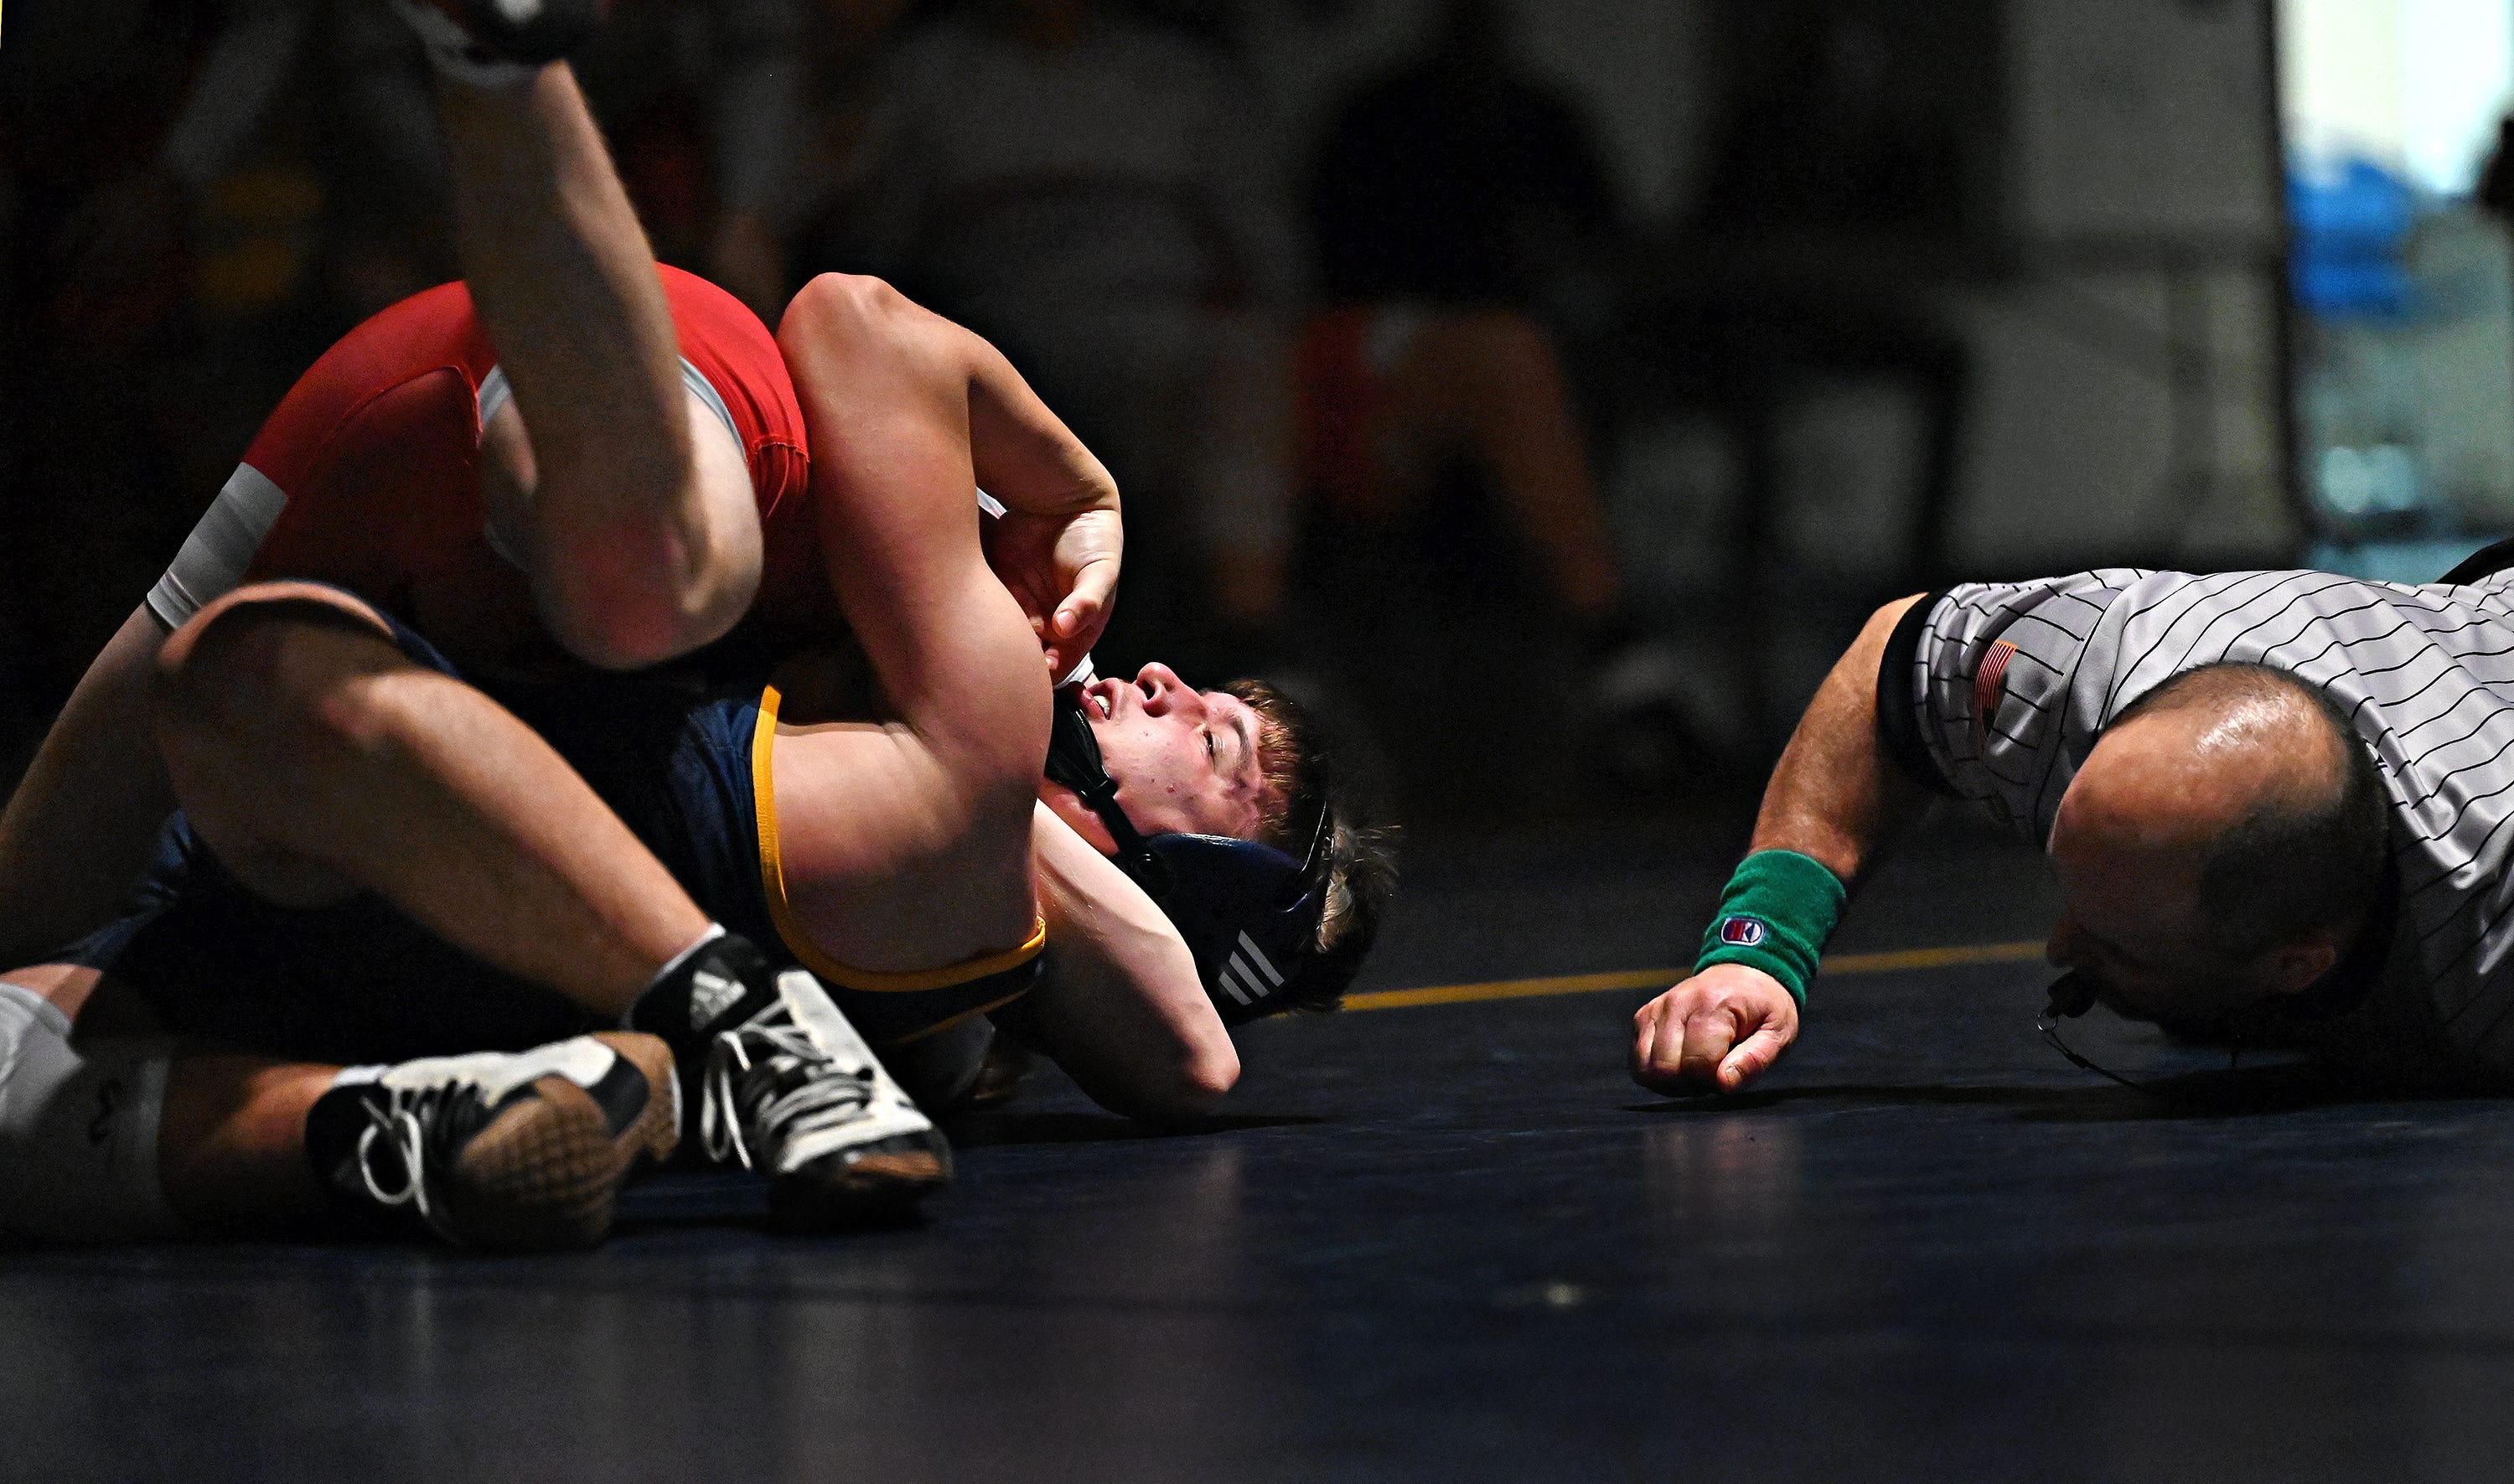 Hamburg’s Cohen Correll, top left, and Eastern York’s Ethan Sgrignoli compete in the 172-pound weight class during PIAA District 3, Class 2-A first round wrestling action at Eastern York High School in Lower Windsor Township, Monday, Jan. 30, 2023. Correll would win the match and Eastern York would win the meet 50-22. Dawn J. Sagert photo